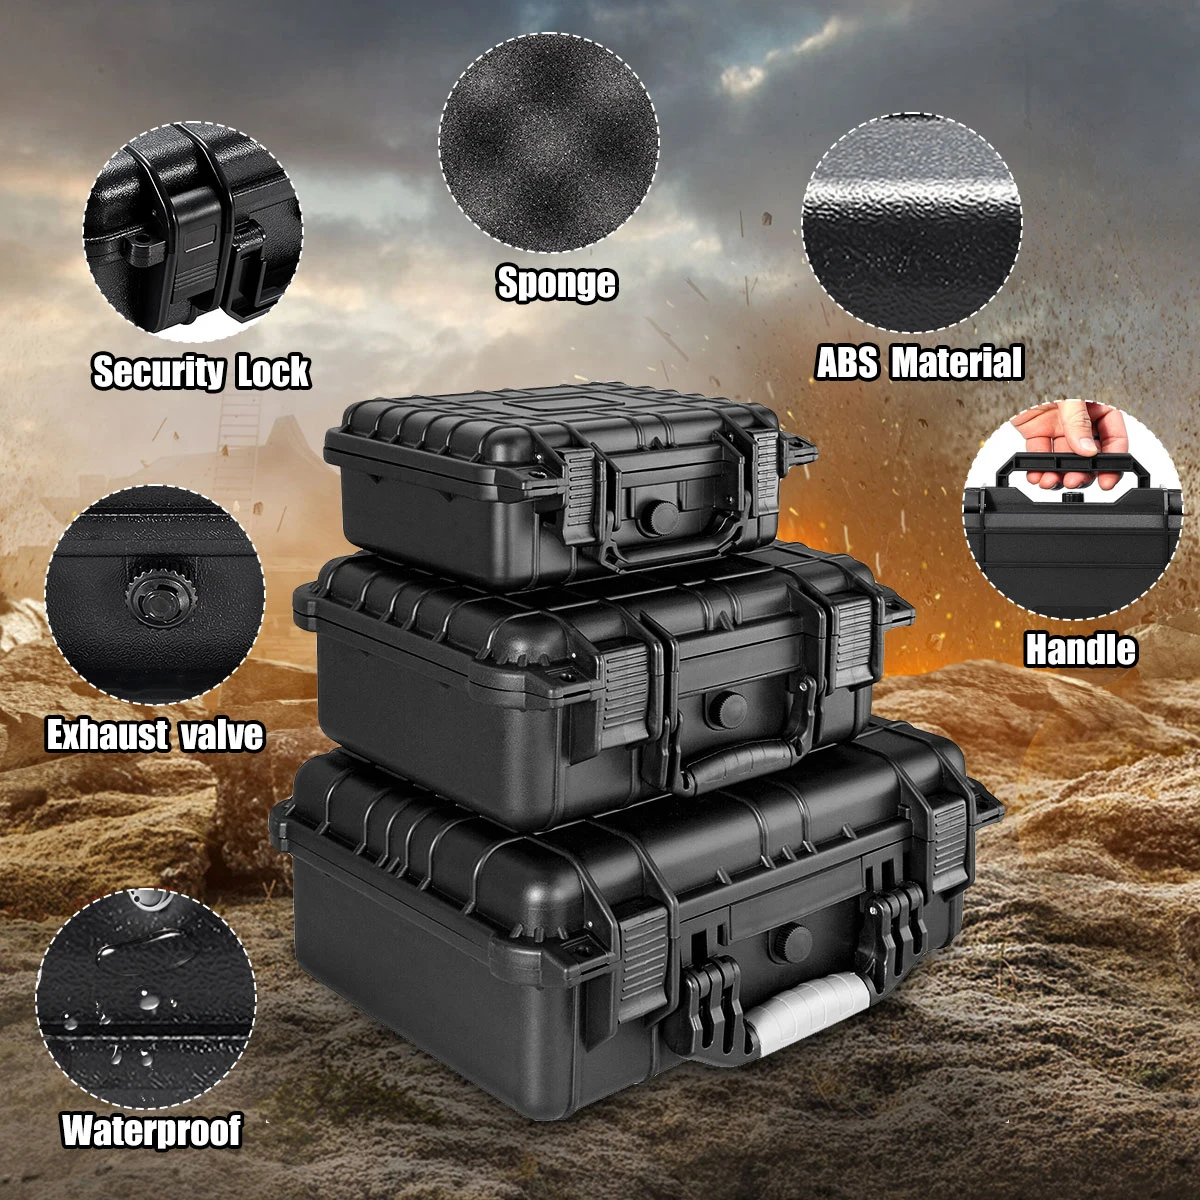 ABS Portable Safety Equipment Case Waterproof Hardware Carry Tool